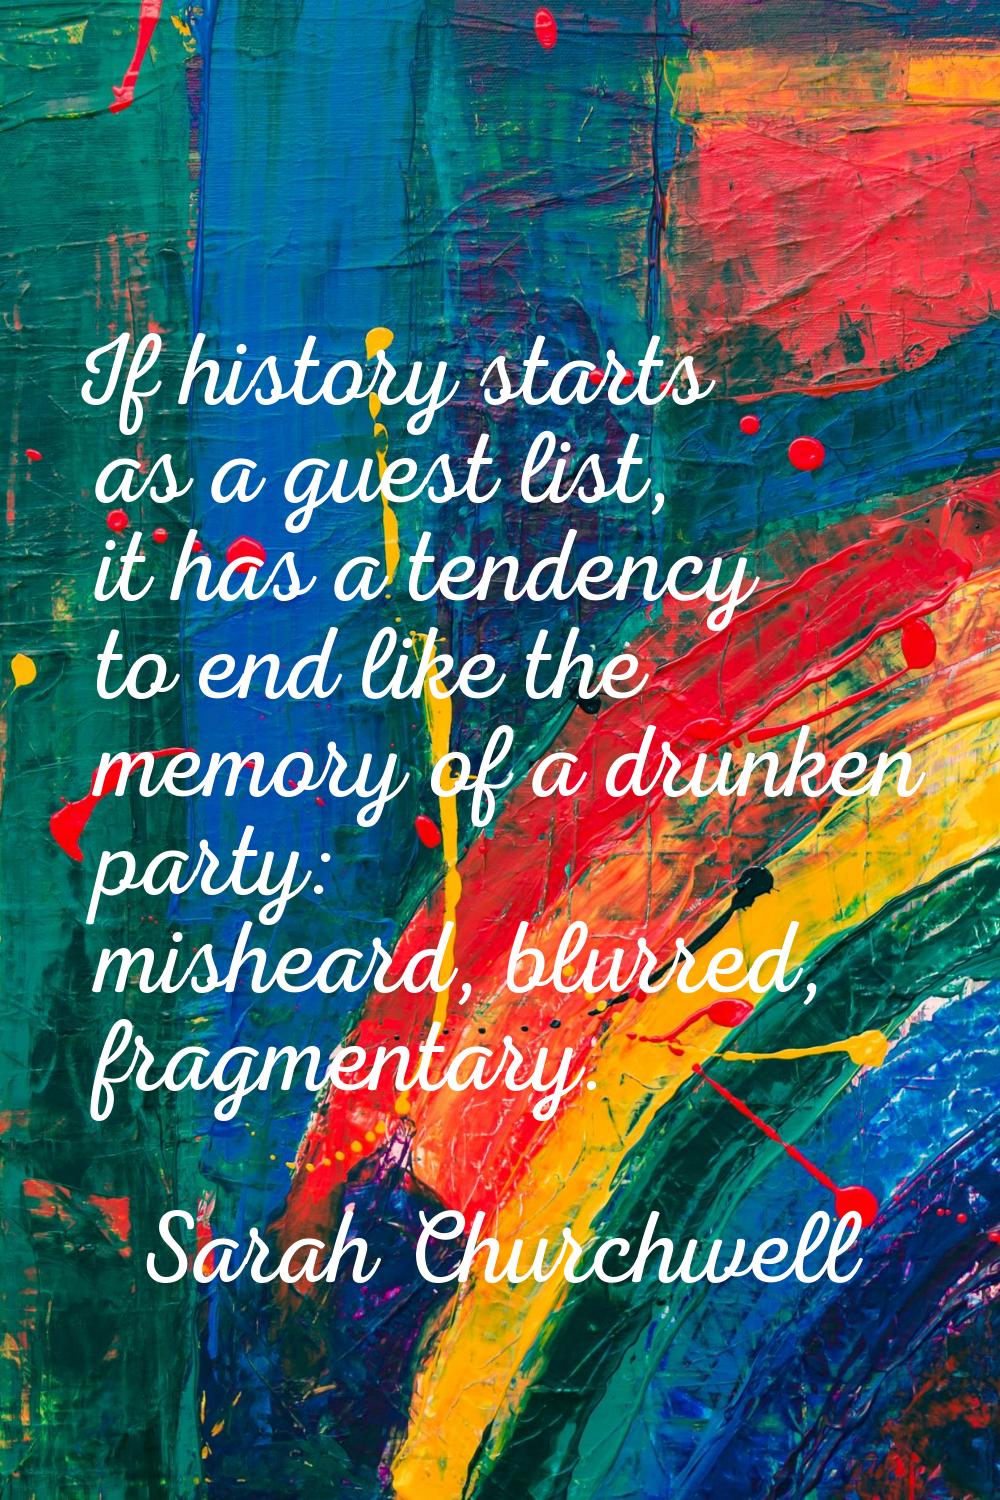 If history starts as a guest list, it has a tendency to end like the memory of a drunken party: mis